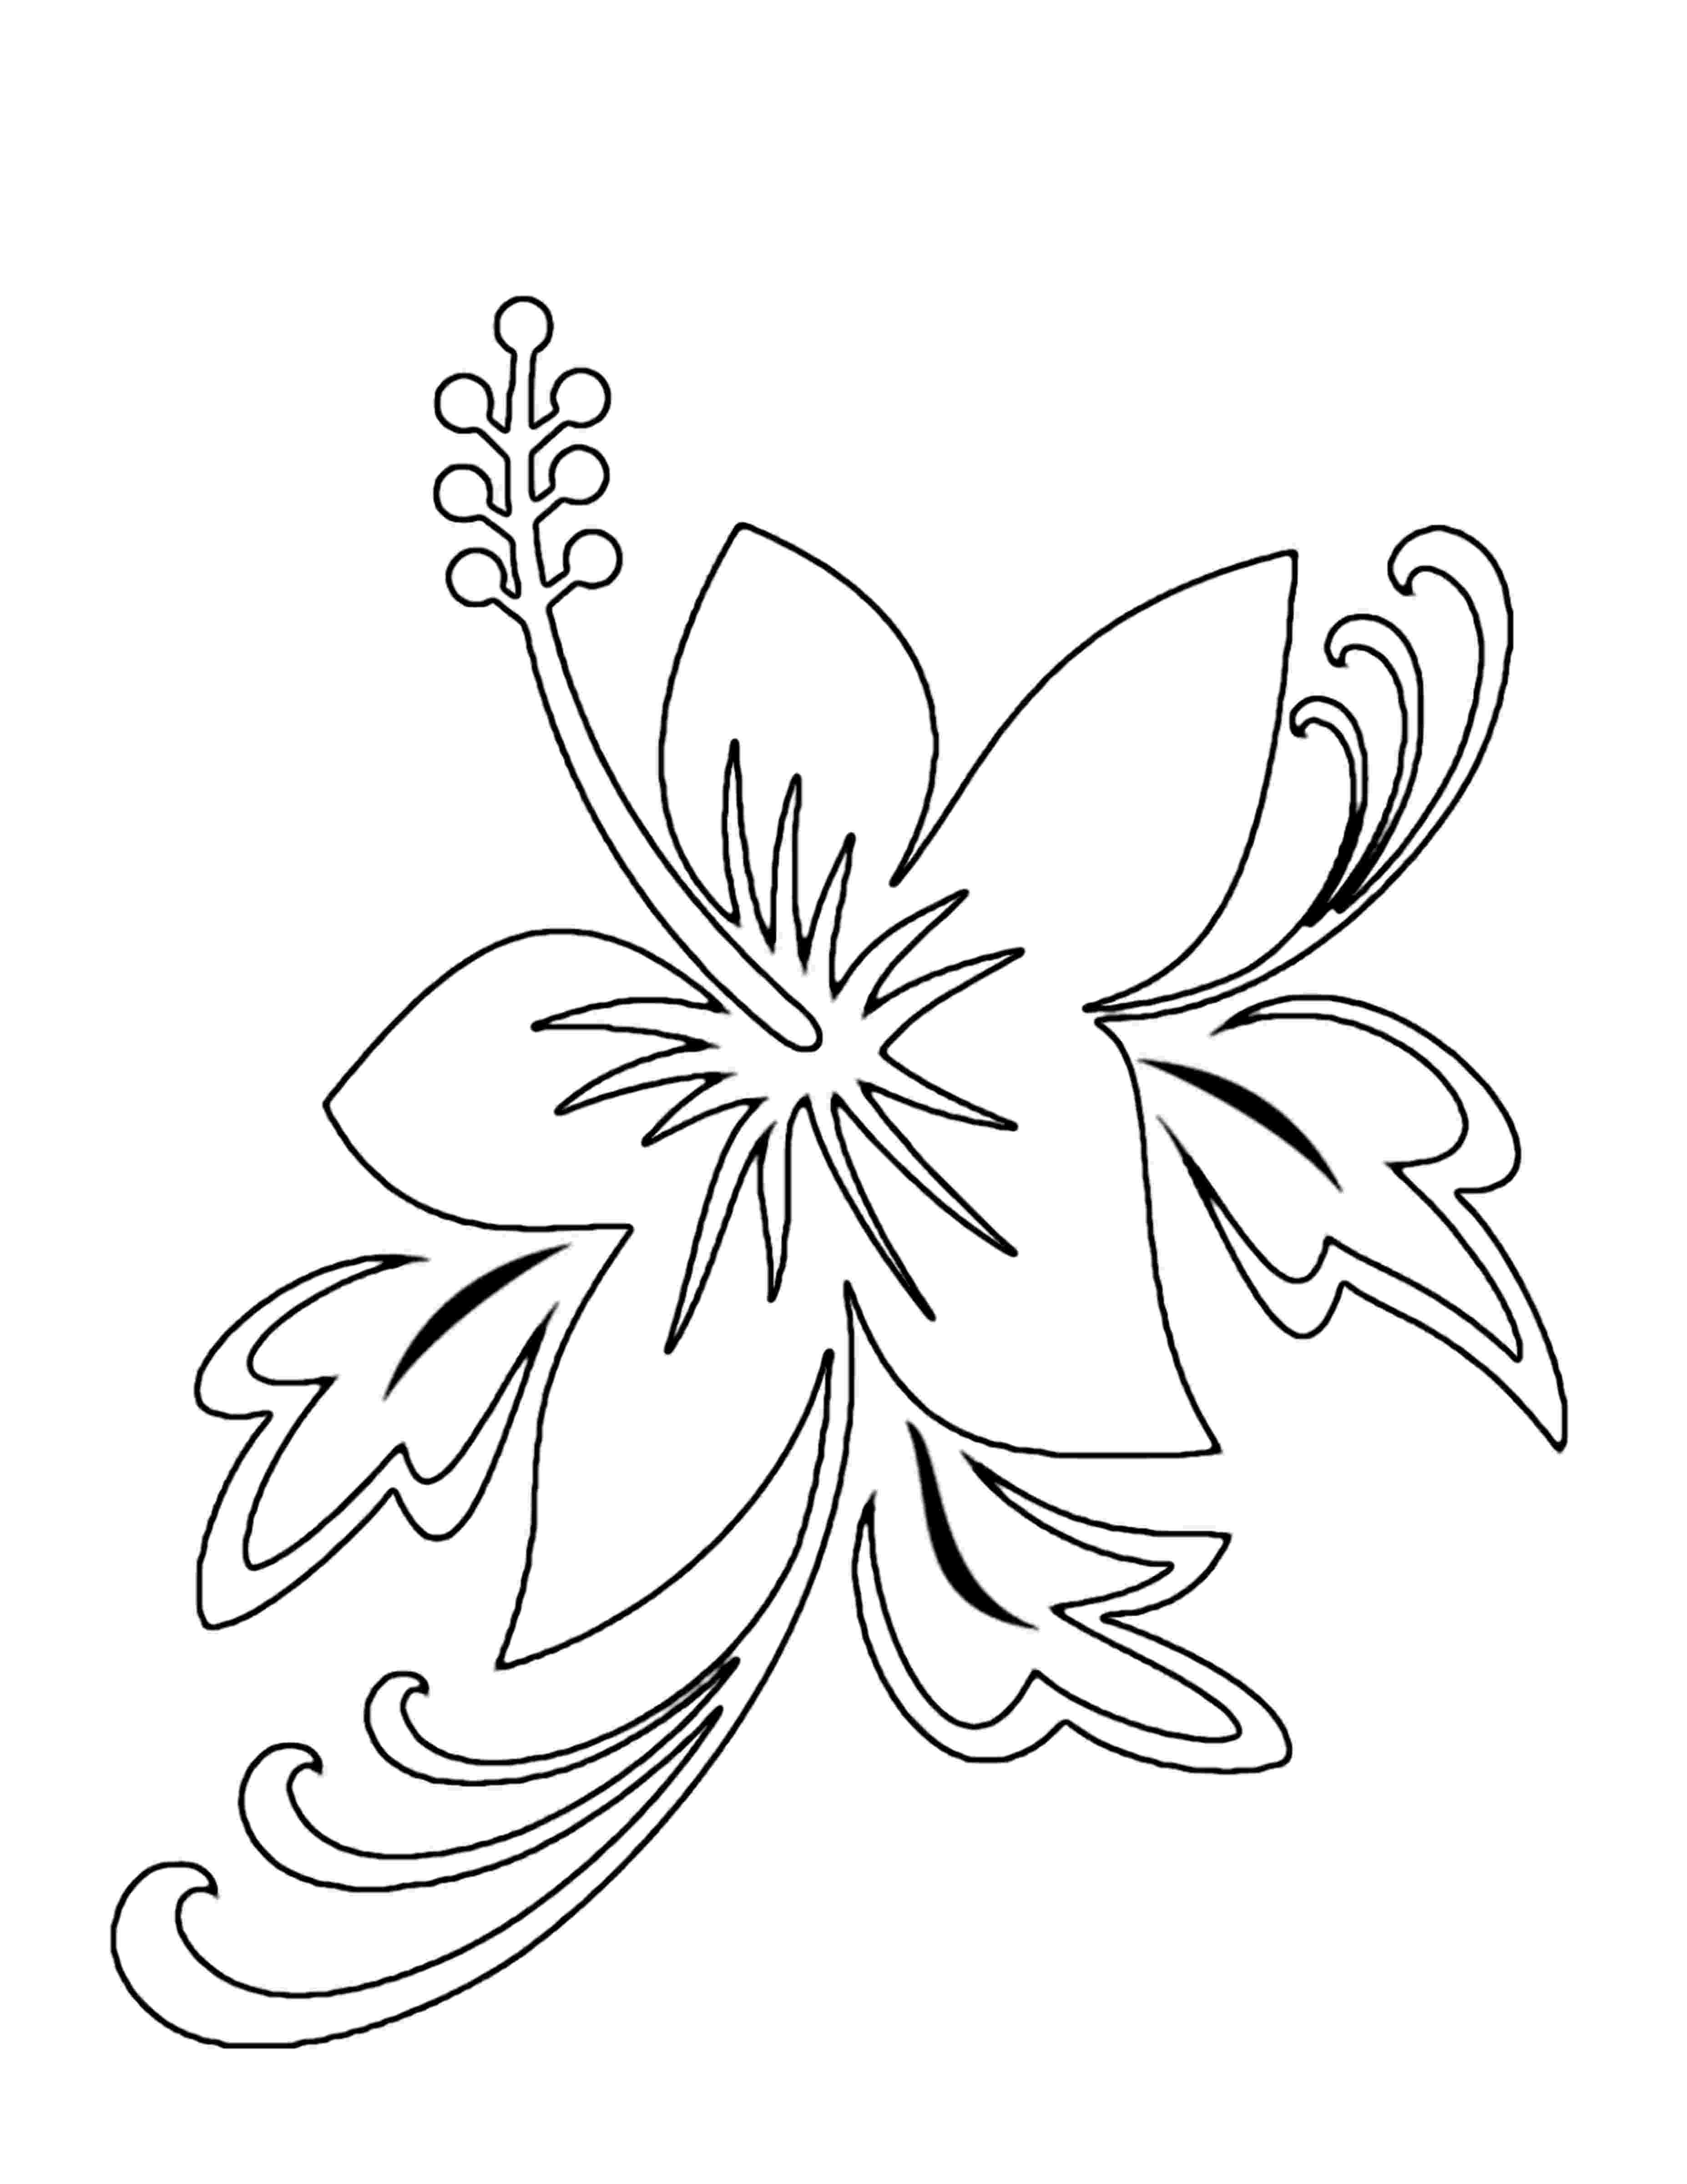 pictures to color of flowers flower pictures to print and color to color flowers of pictures 